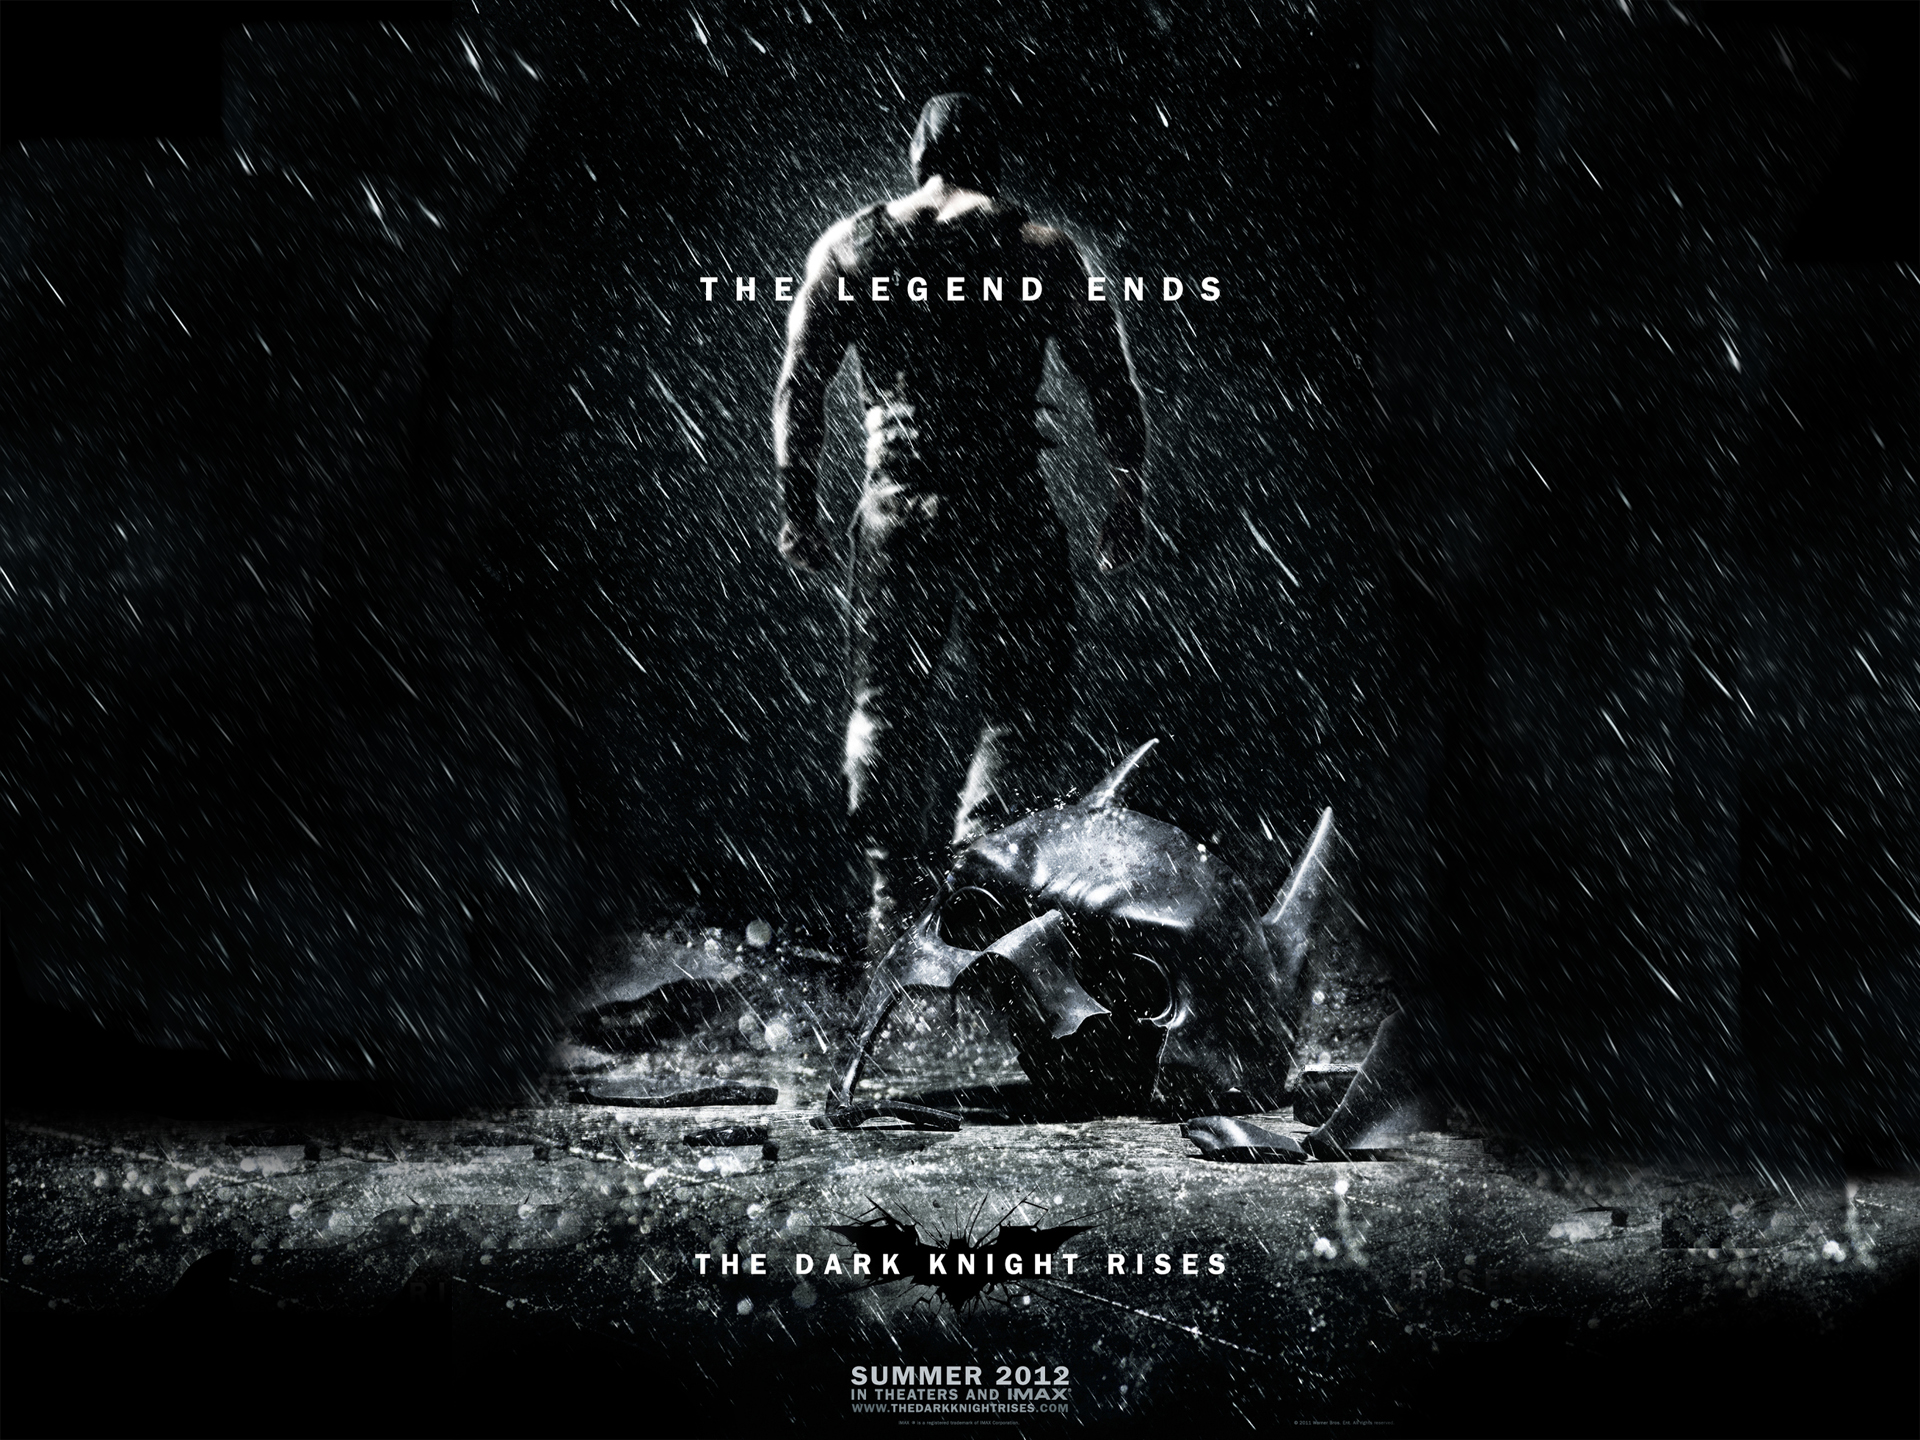 The Dark Knight Rises Two Exclusive wallpapers and the new poster